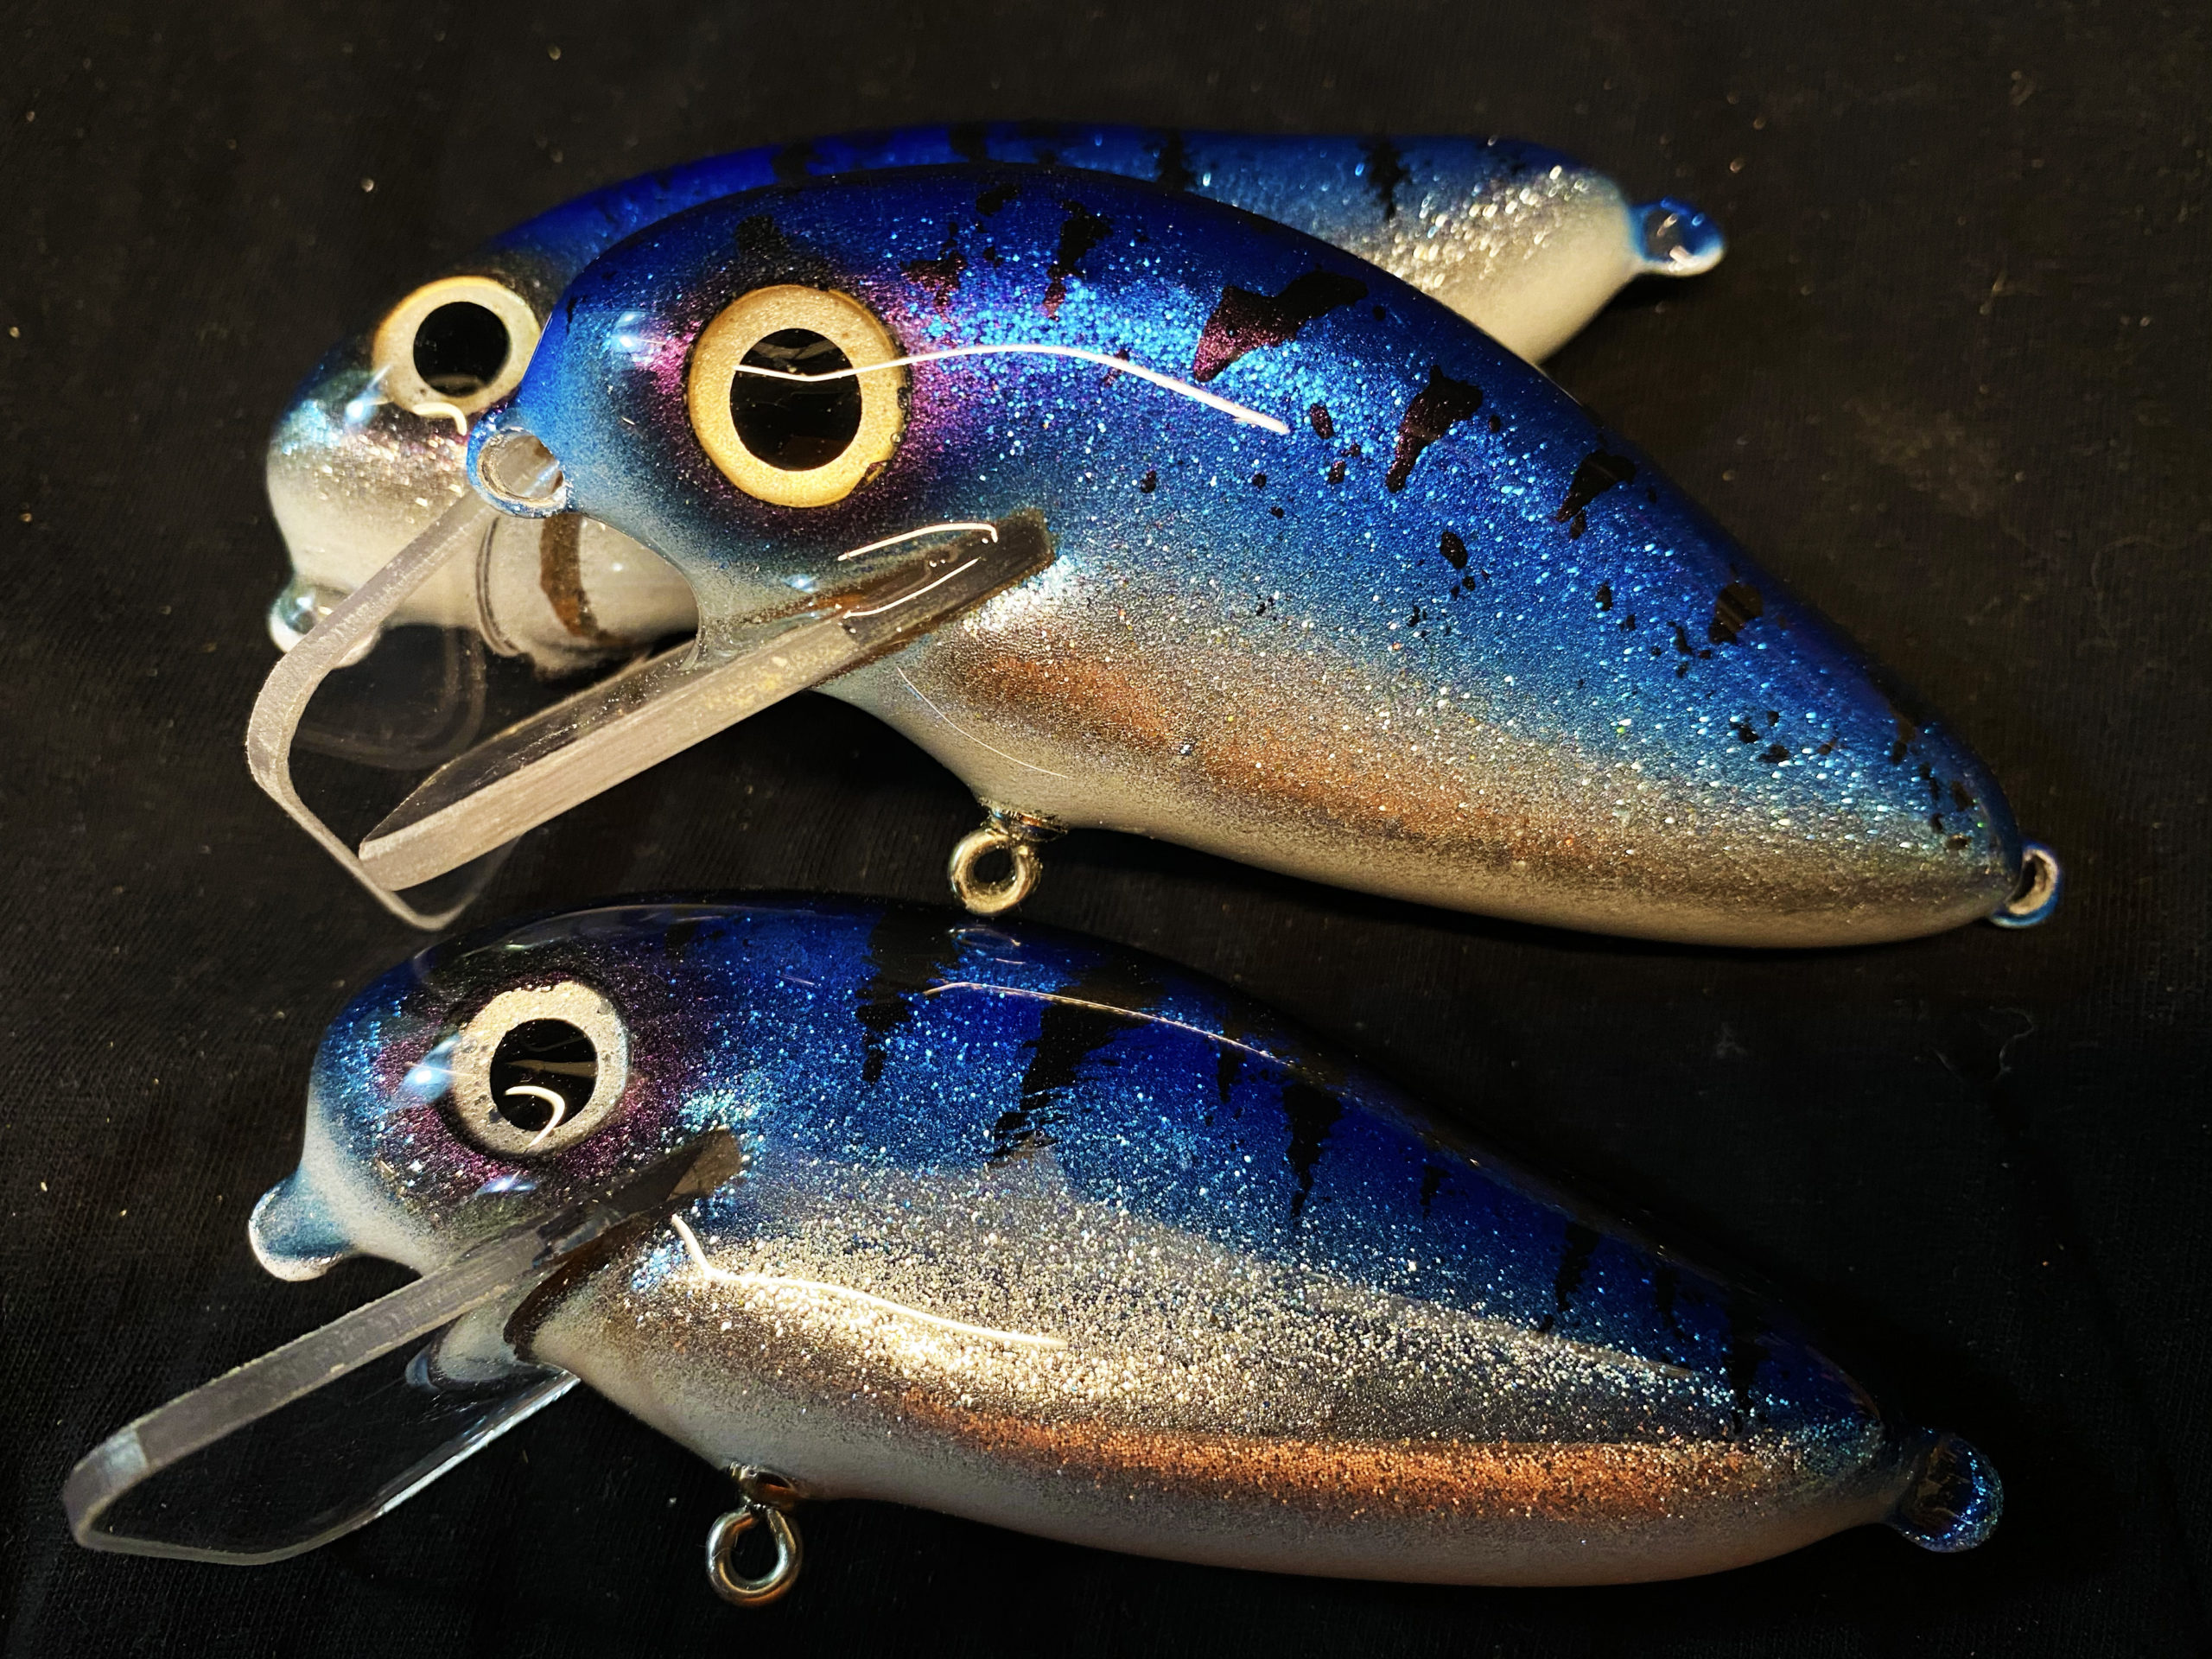 https://www.lovelylures.com/wp-content/uploads/2020/01/Zappa-Crank-Electric-blue-scaled.jpg